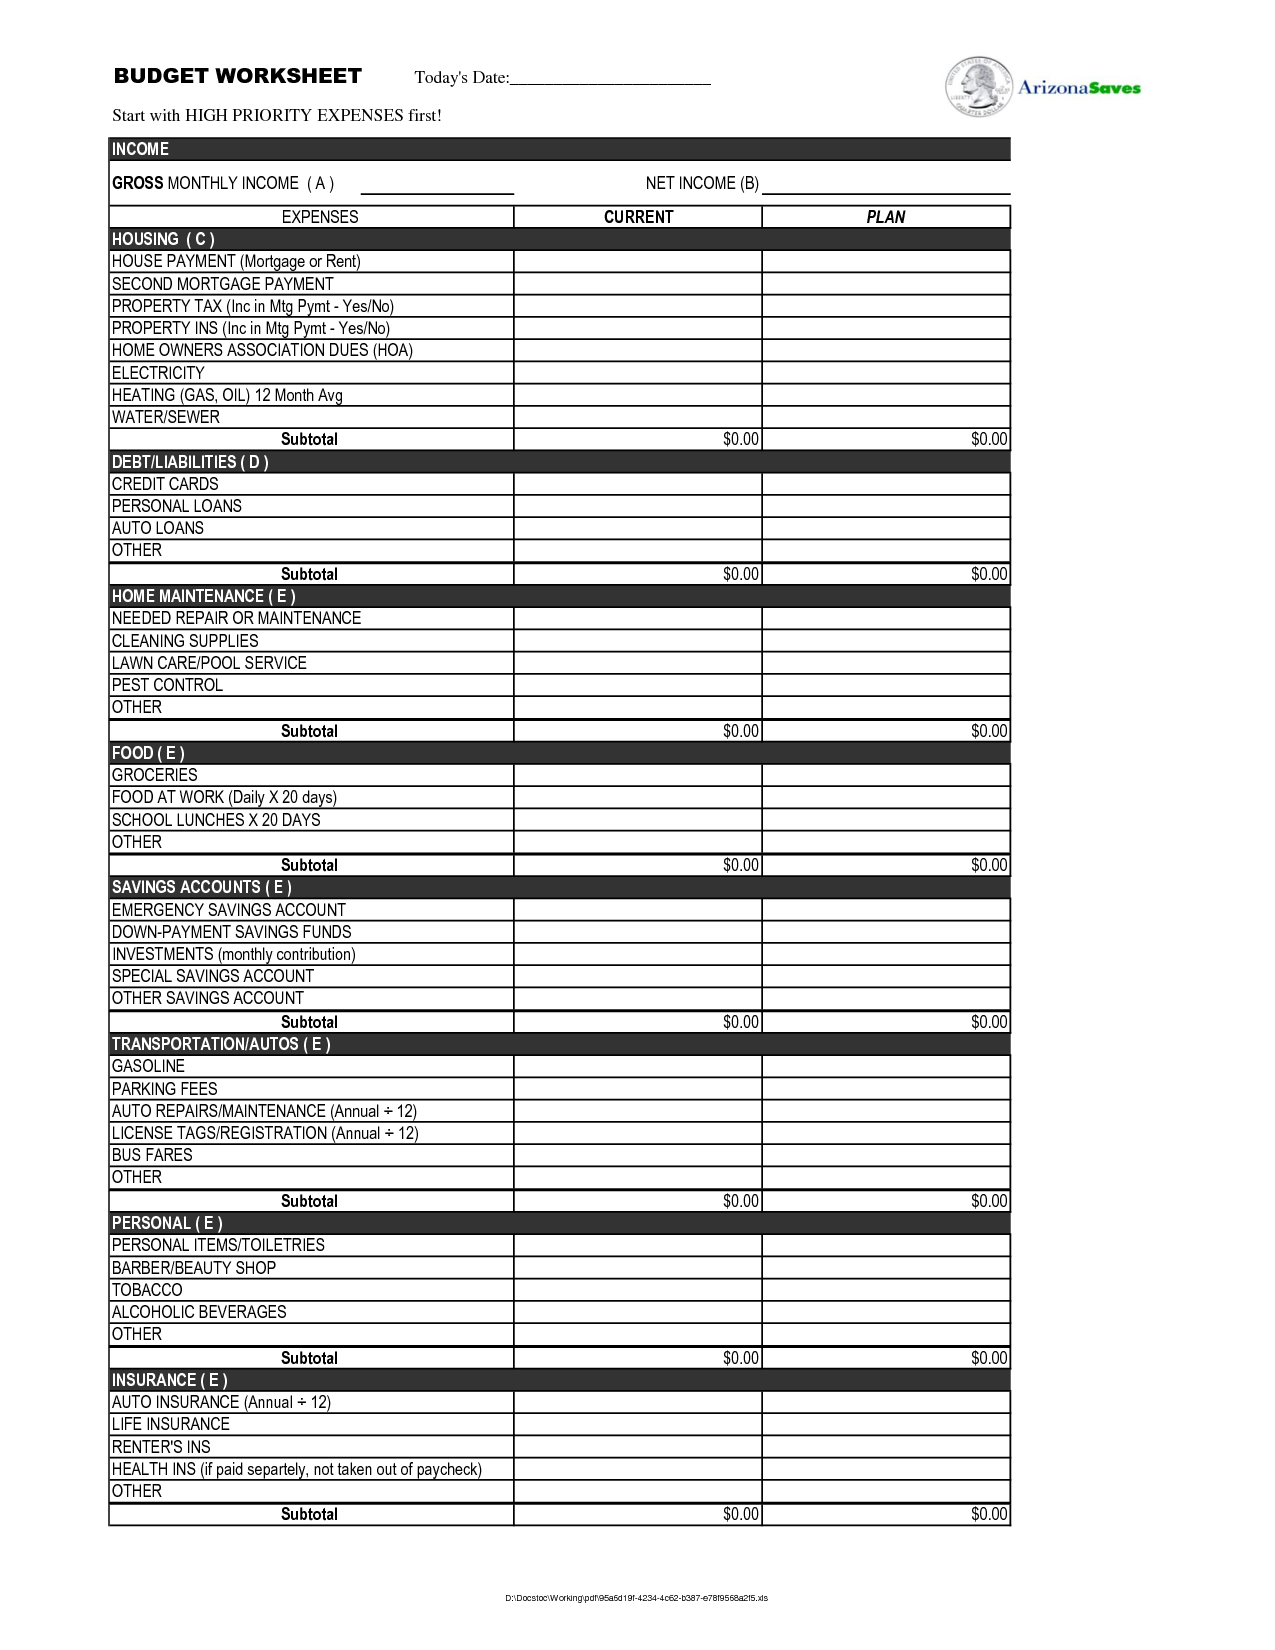 Monthly Income Expense Worksheet Image